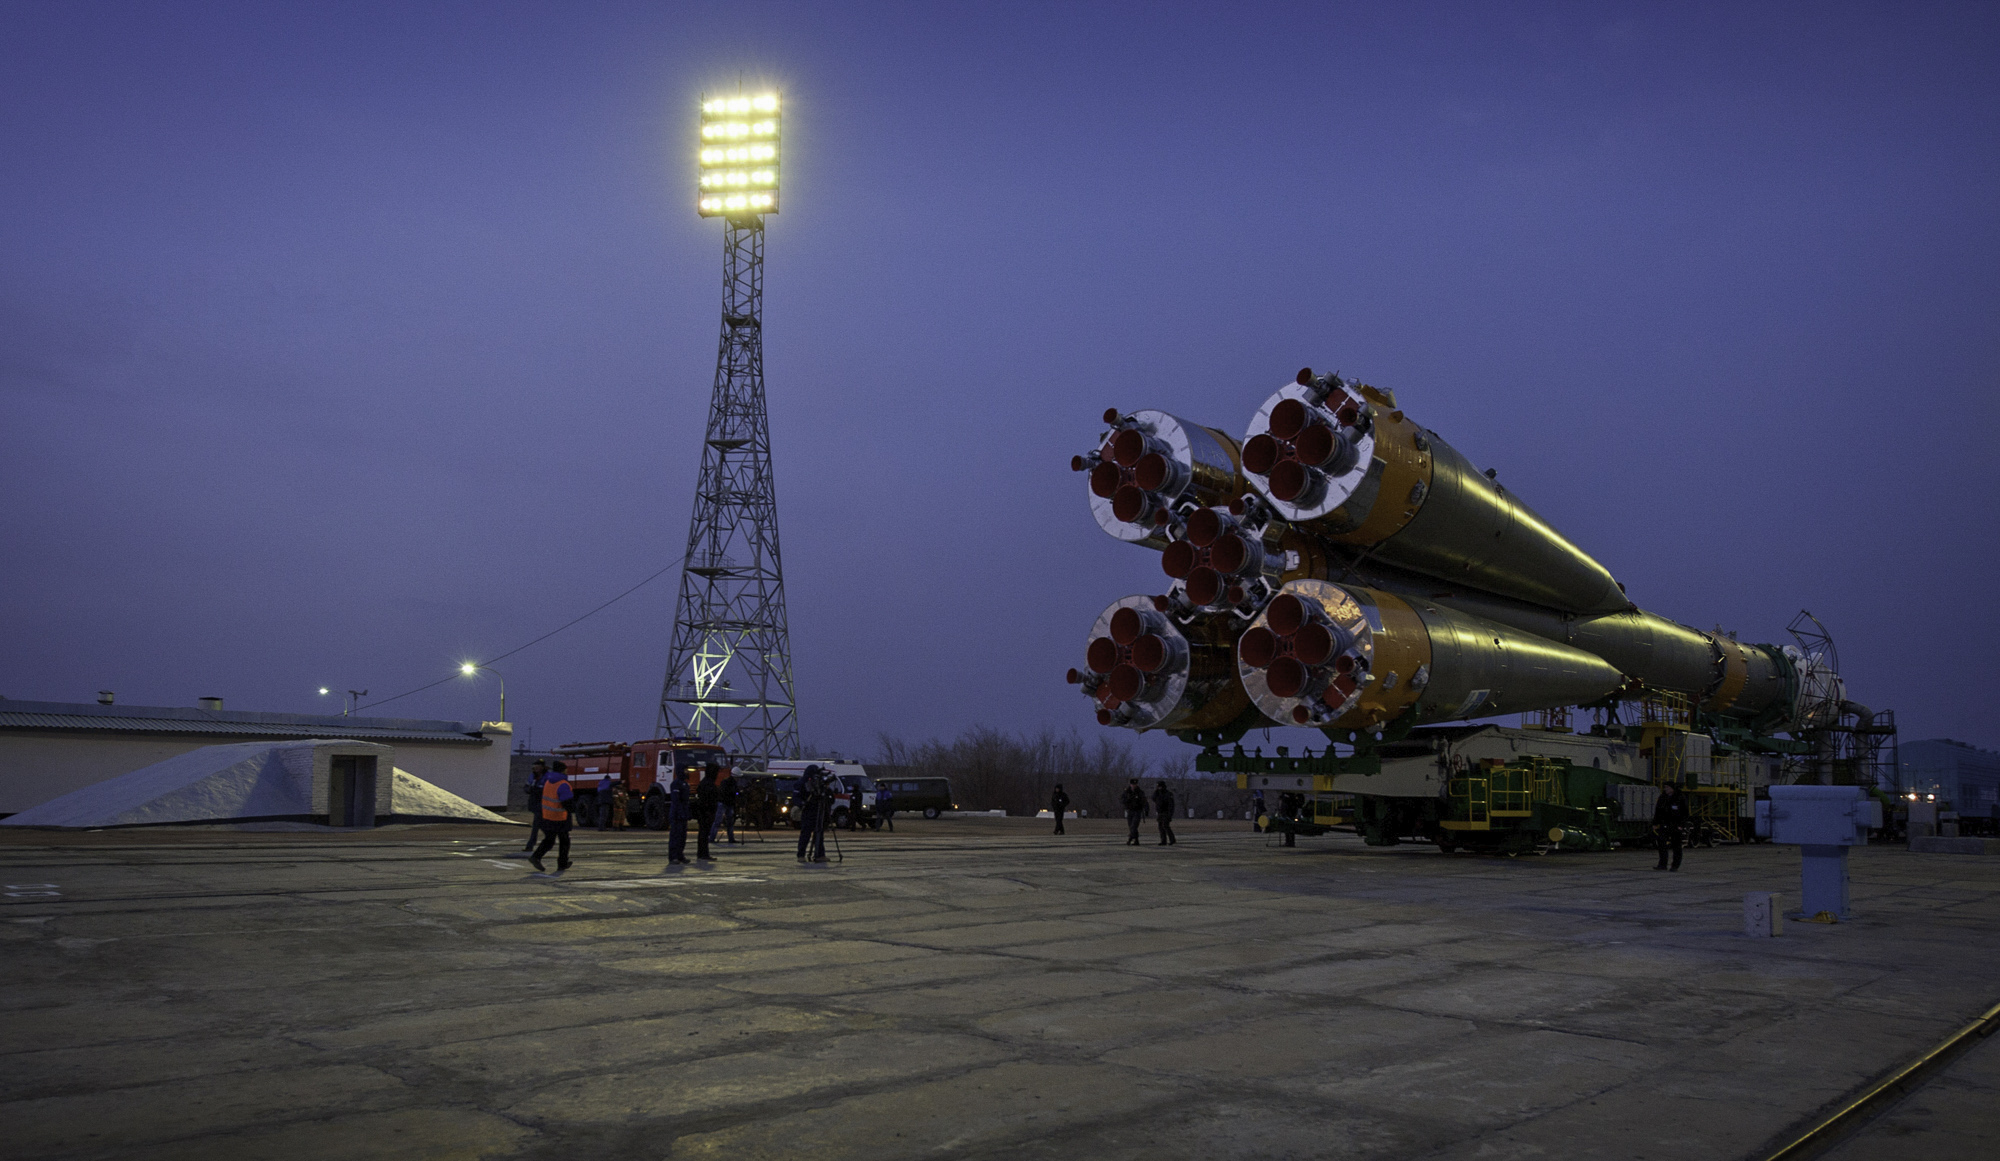  The Soyuz TMA-20 spacecraft is seen as it arrives at the launch pad Monday, Dec. 13, 2010 at the Baikonur Cosmodrome in Kazakhstan. The Soyuz is scheduled to launch the crew of Expedition 26 on Thursday, Dec. 16, 2010. (NASA/Carla Cioffi) 